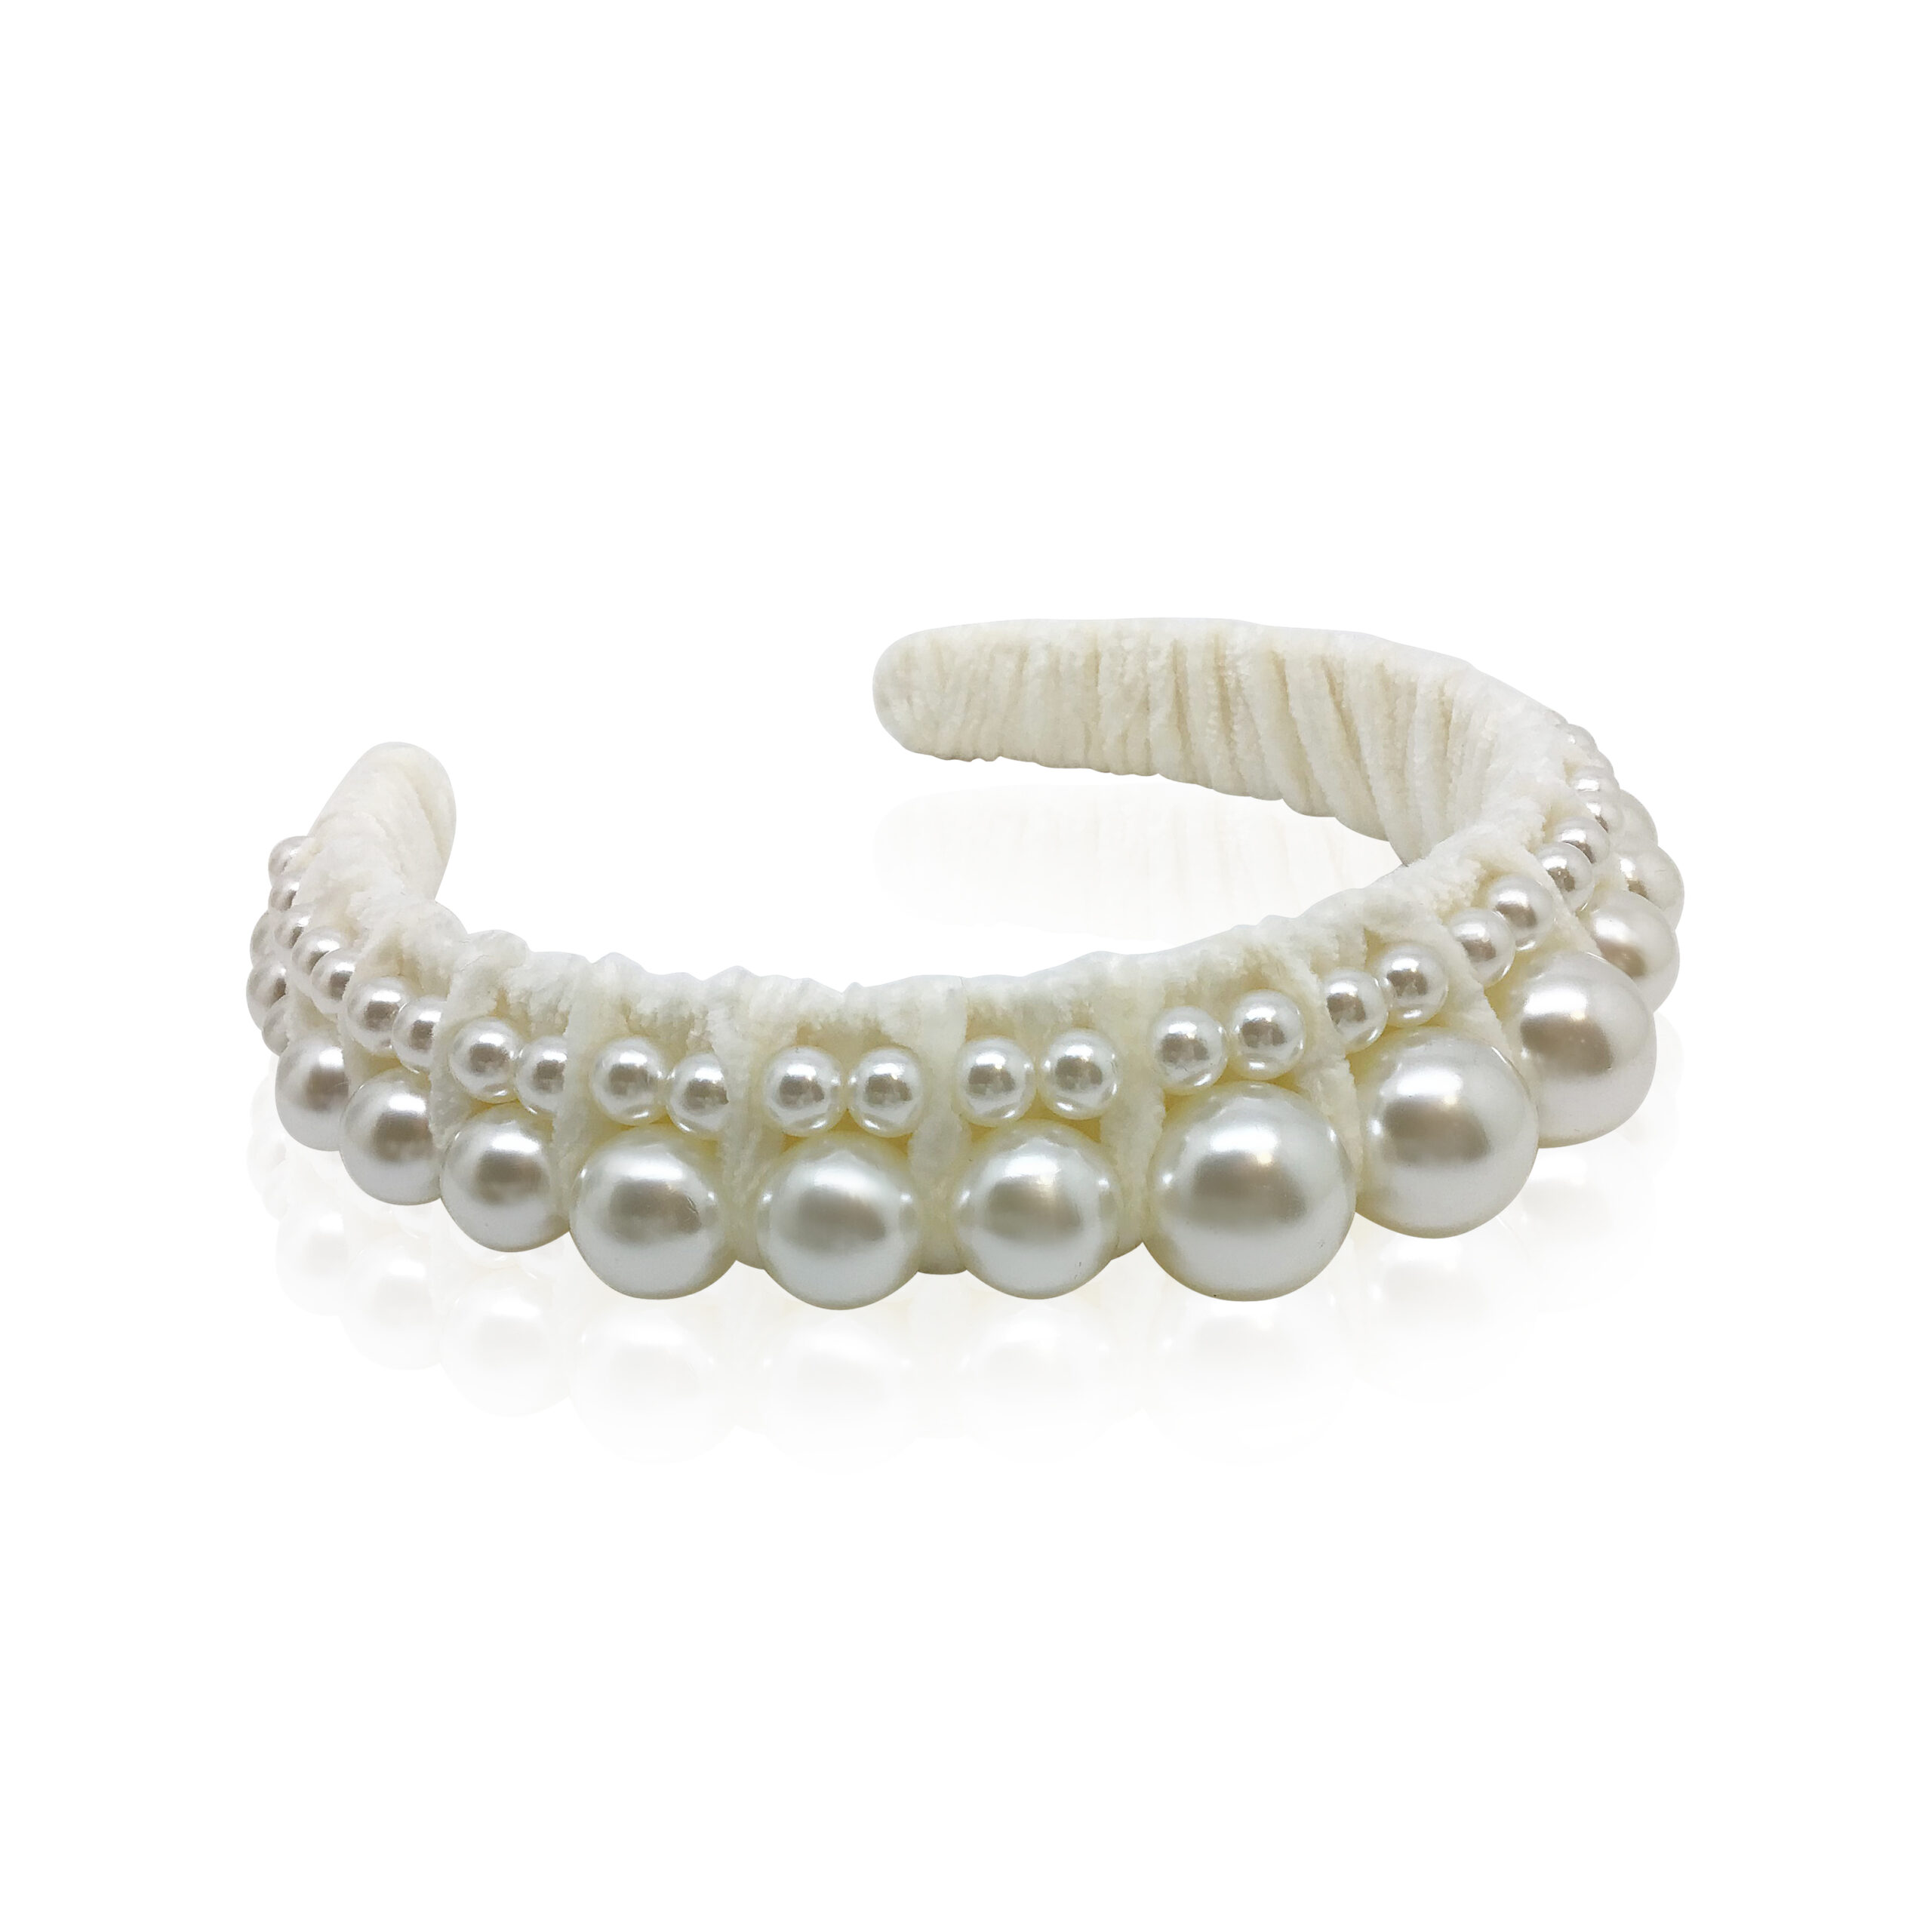 Bridal Pearl|Claudine|Jeanette Maree|Shop Online